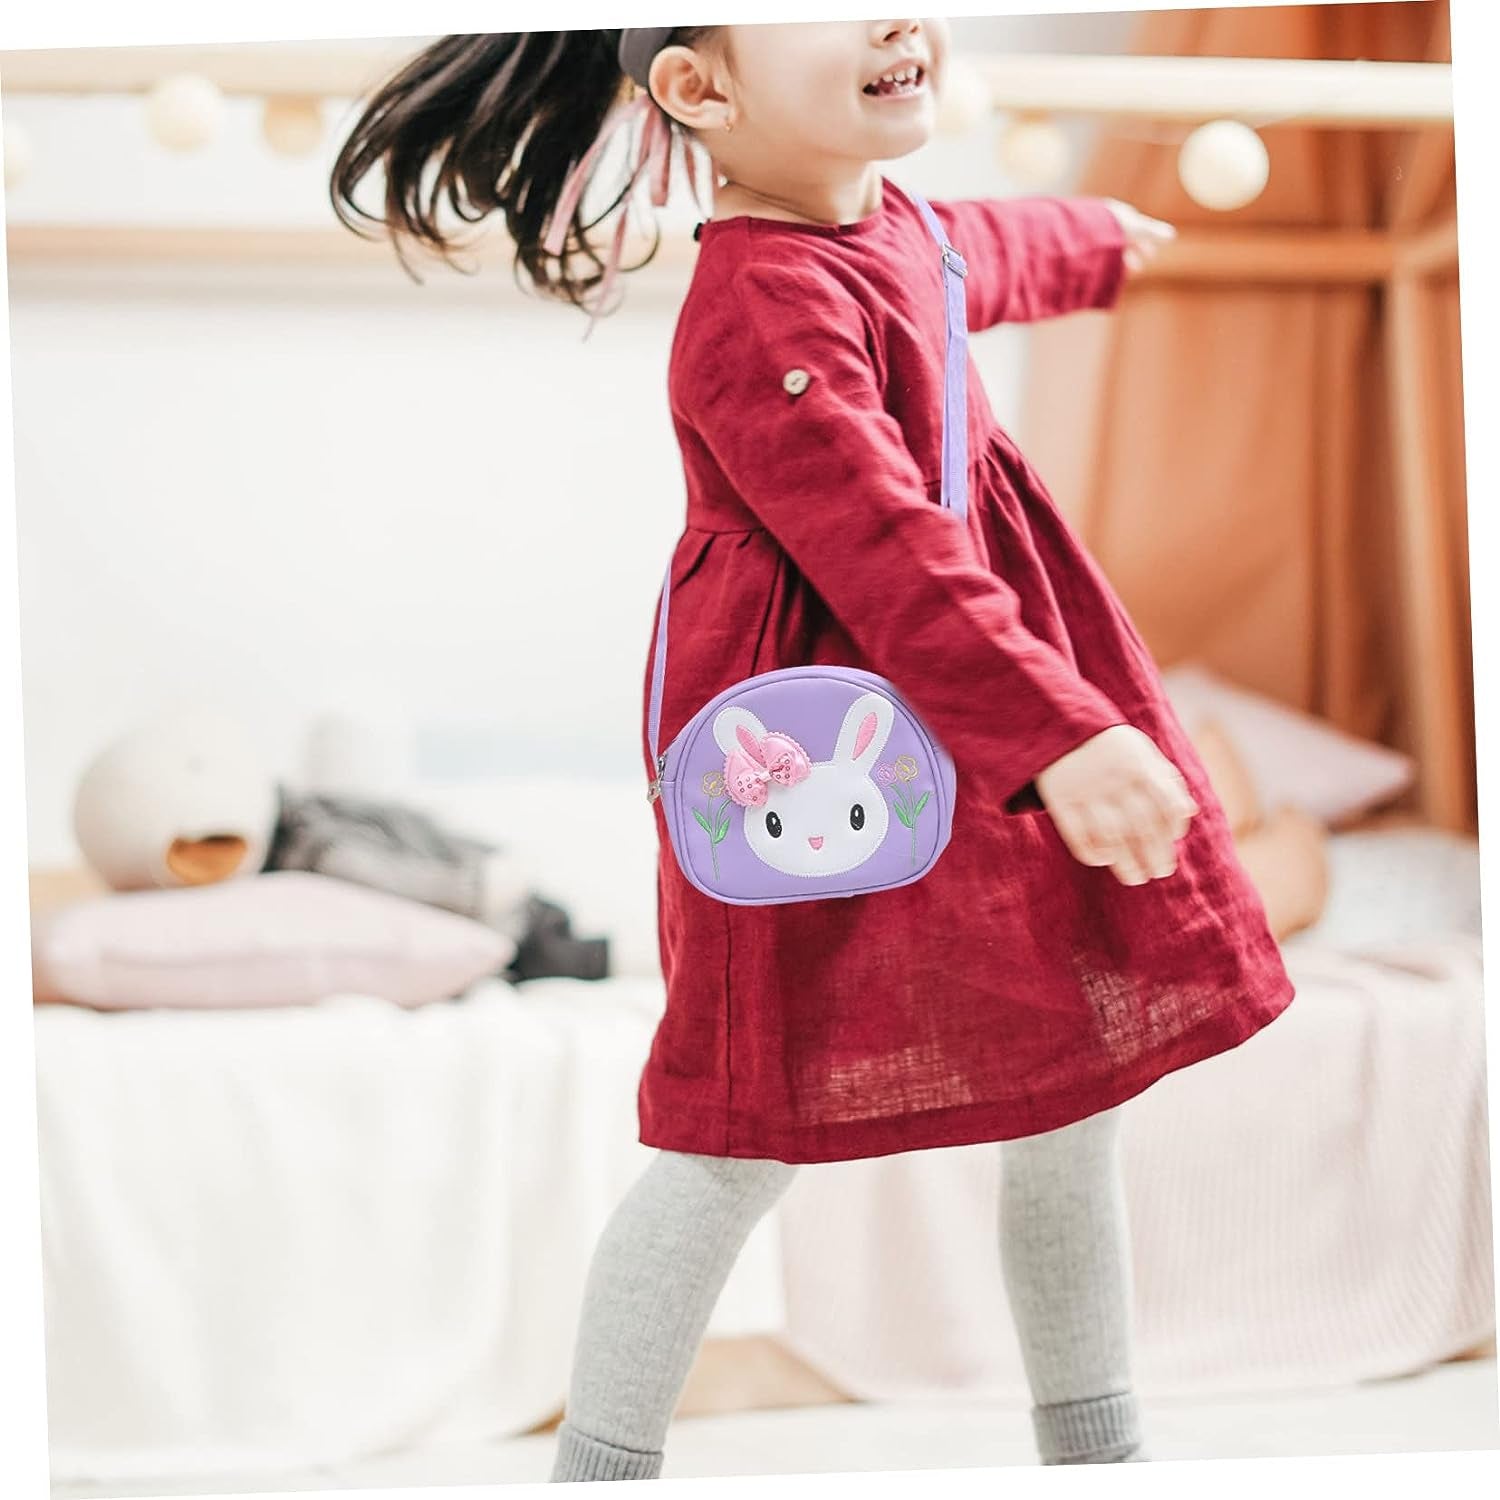 Buy mibasies Unicorn Purse Kids Toddler Gifts for Little Girls Purses  Presents Online at Lowest Price Ever in India | Check Reviews & Ratings -  Shop The World